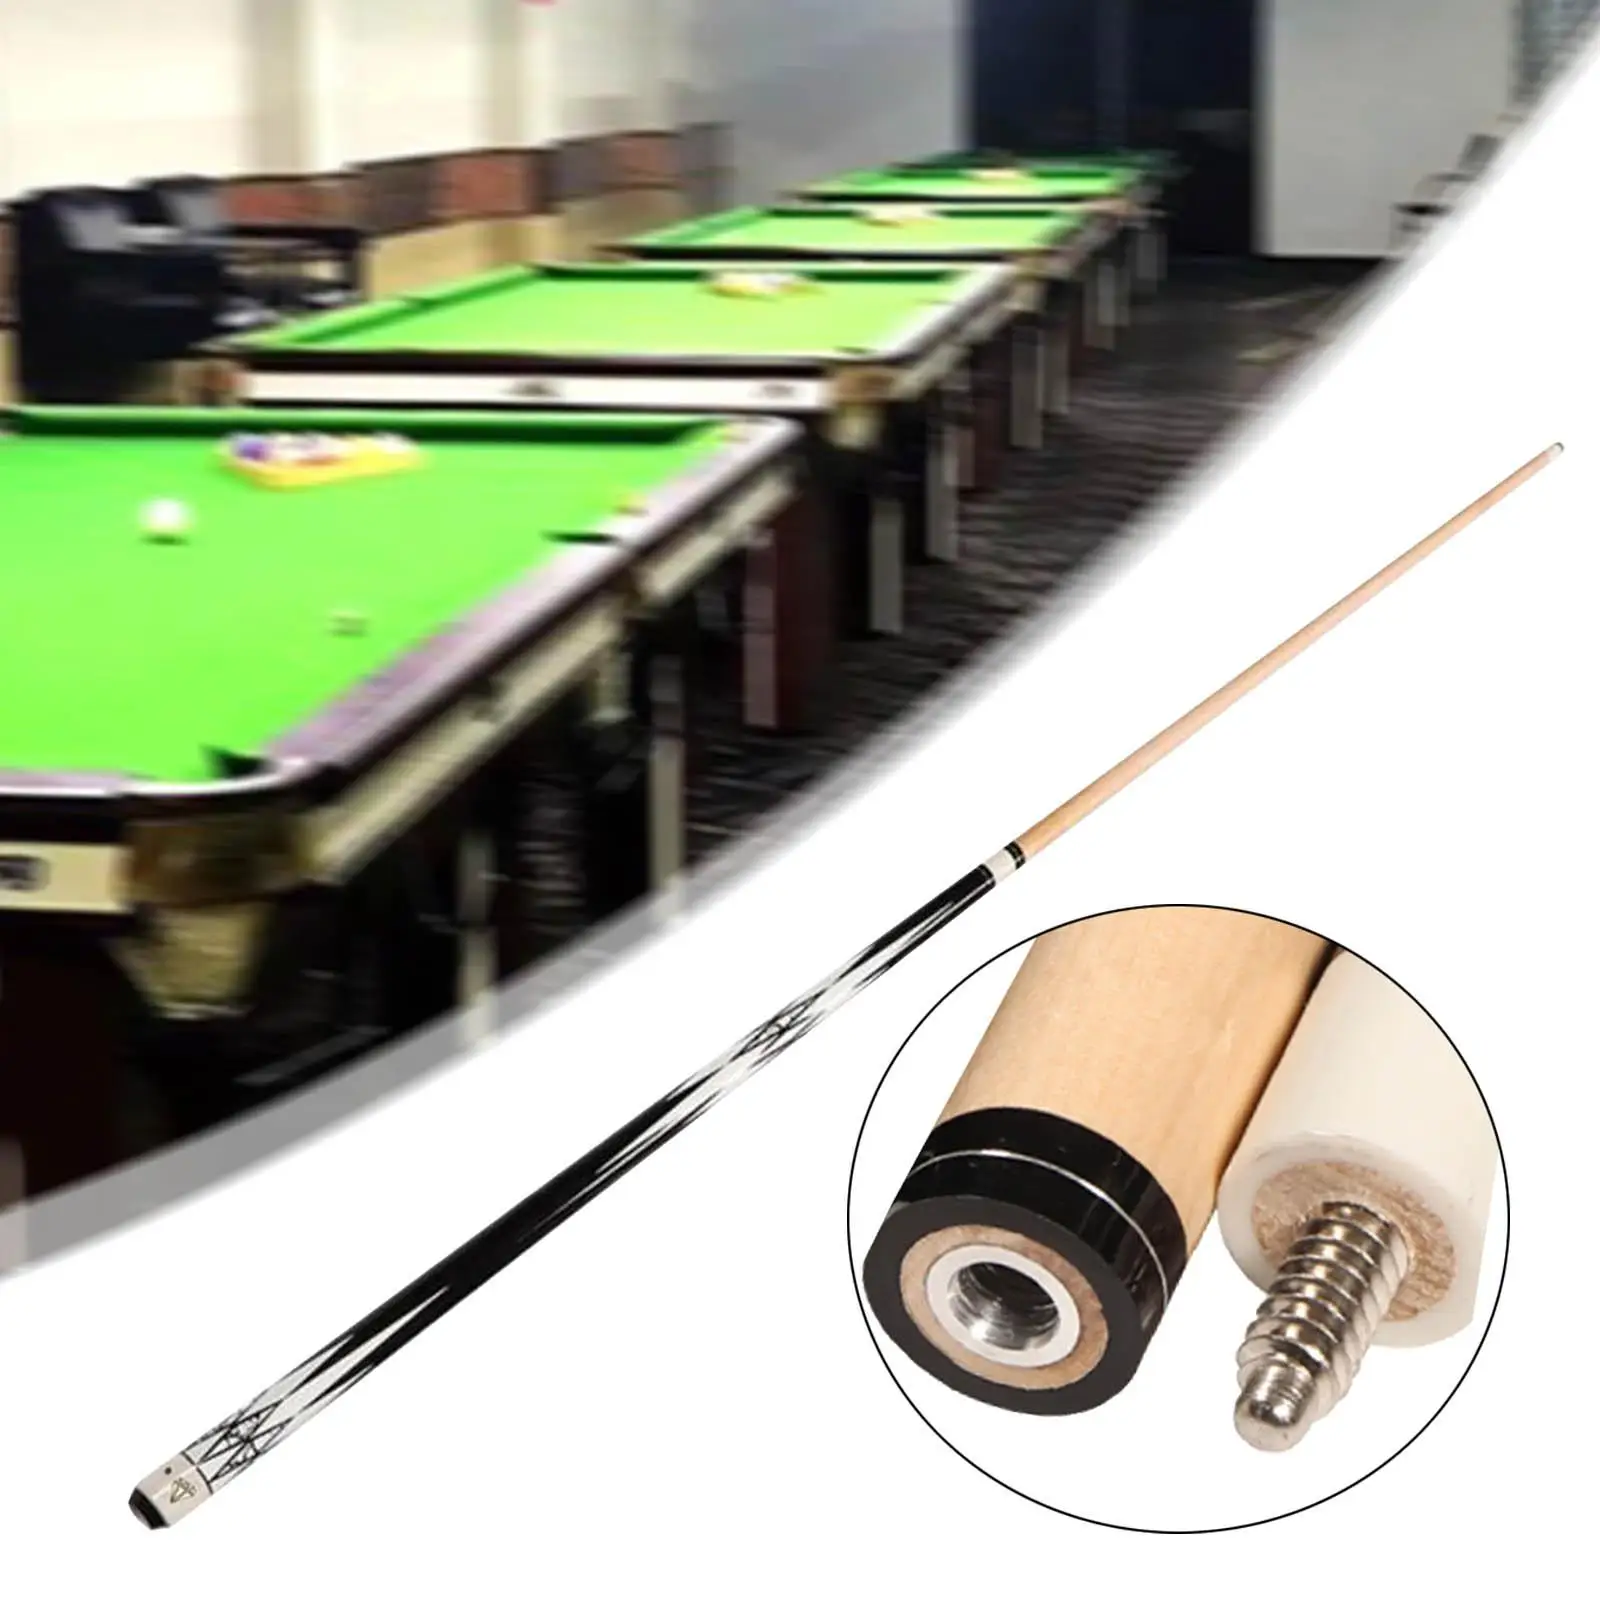 Billiard/Pool Cue White Ferrule 145cm Two Section Man Cave Gift Snooker Cue